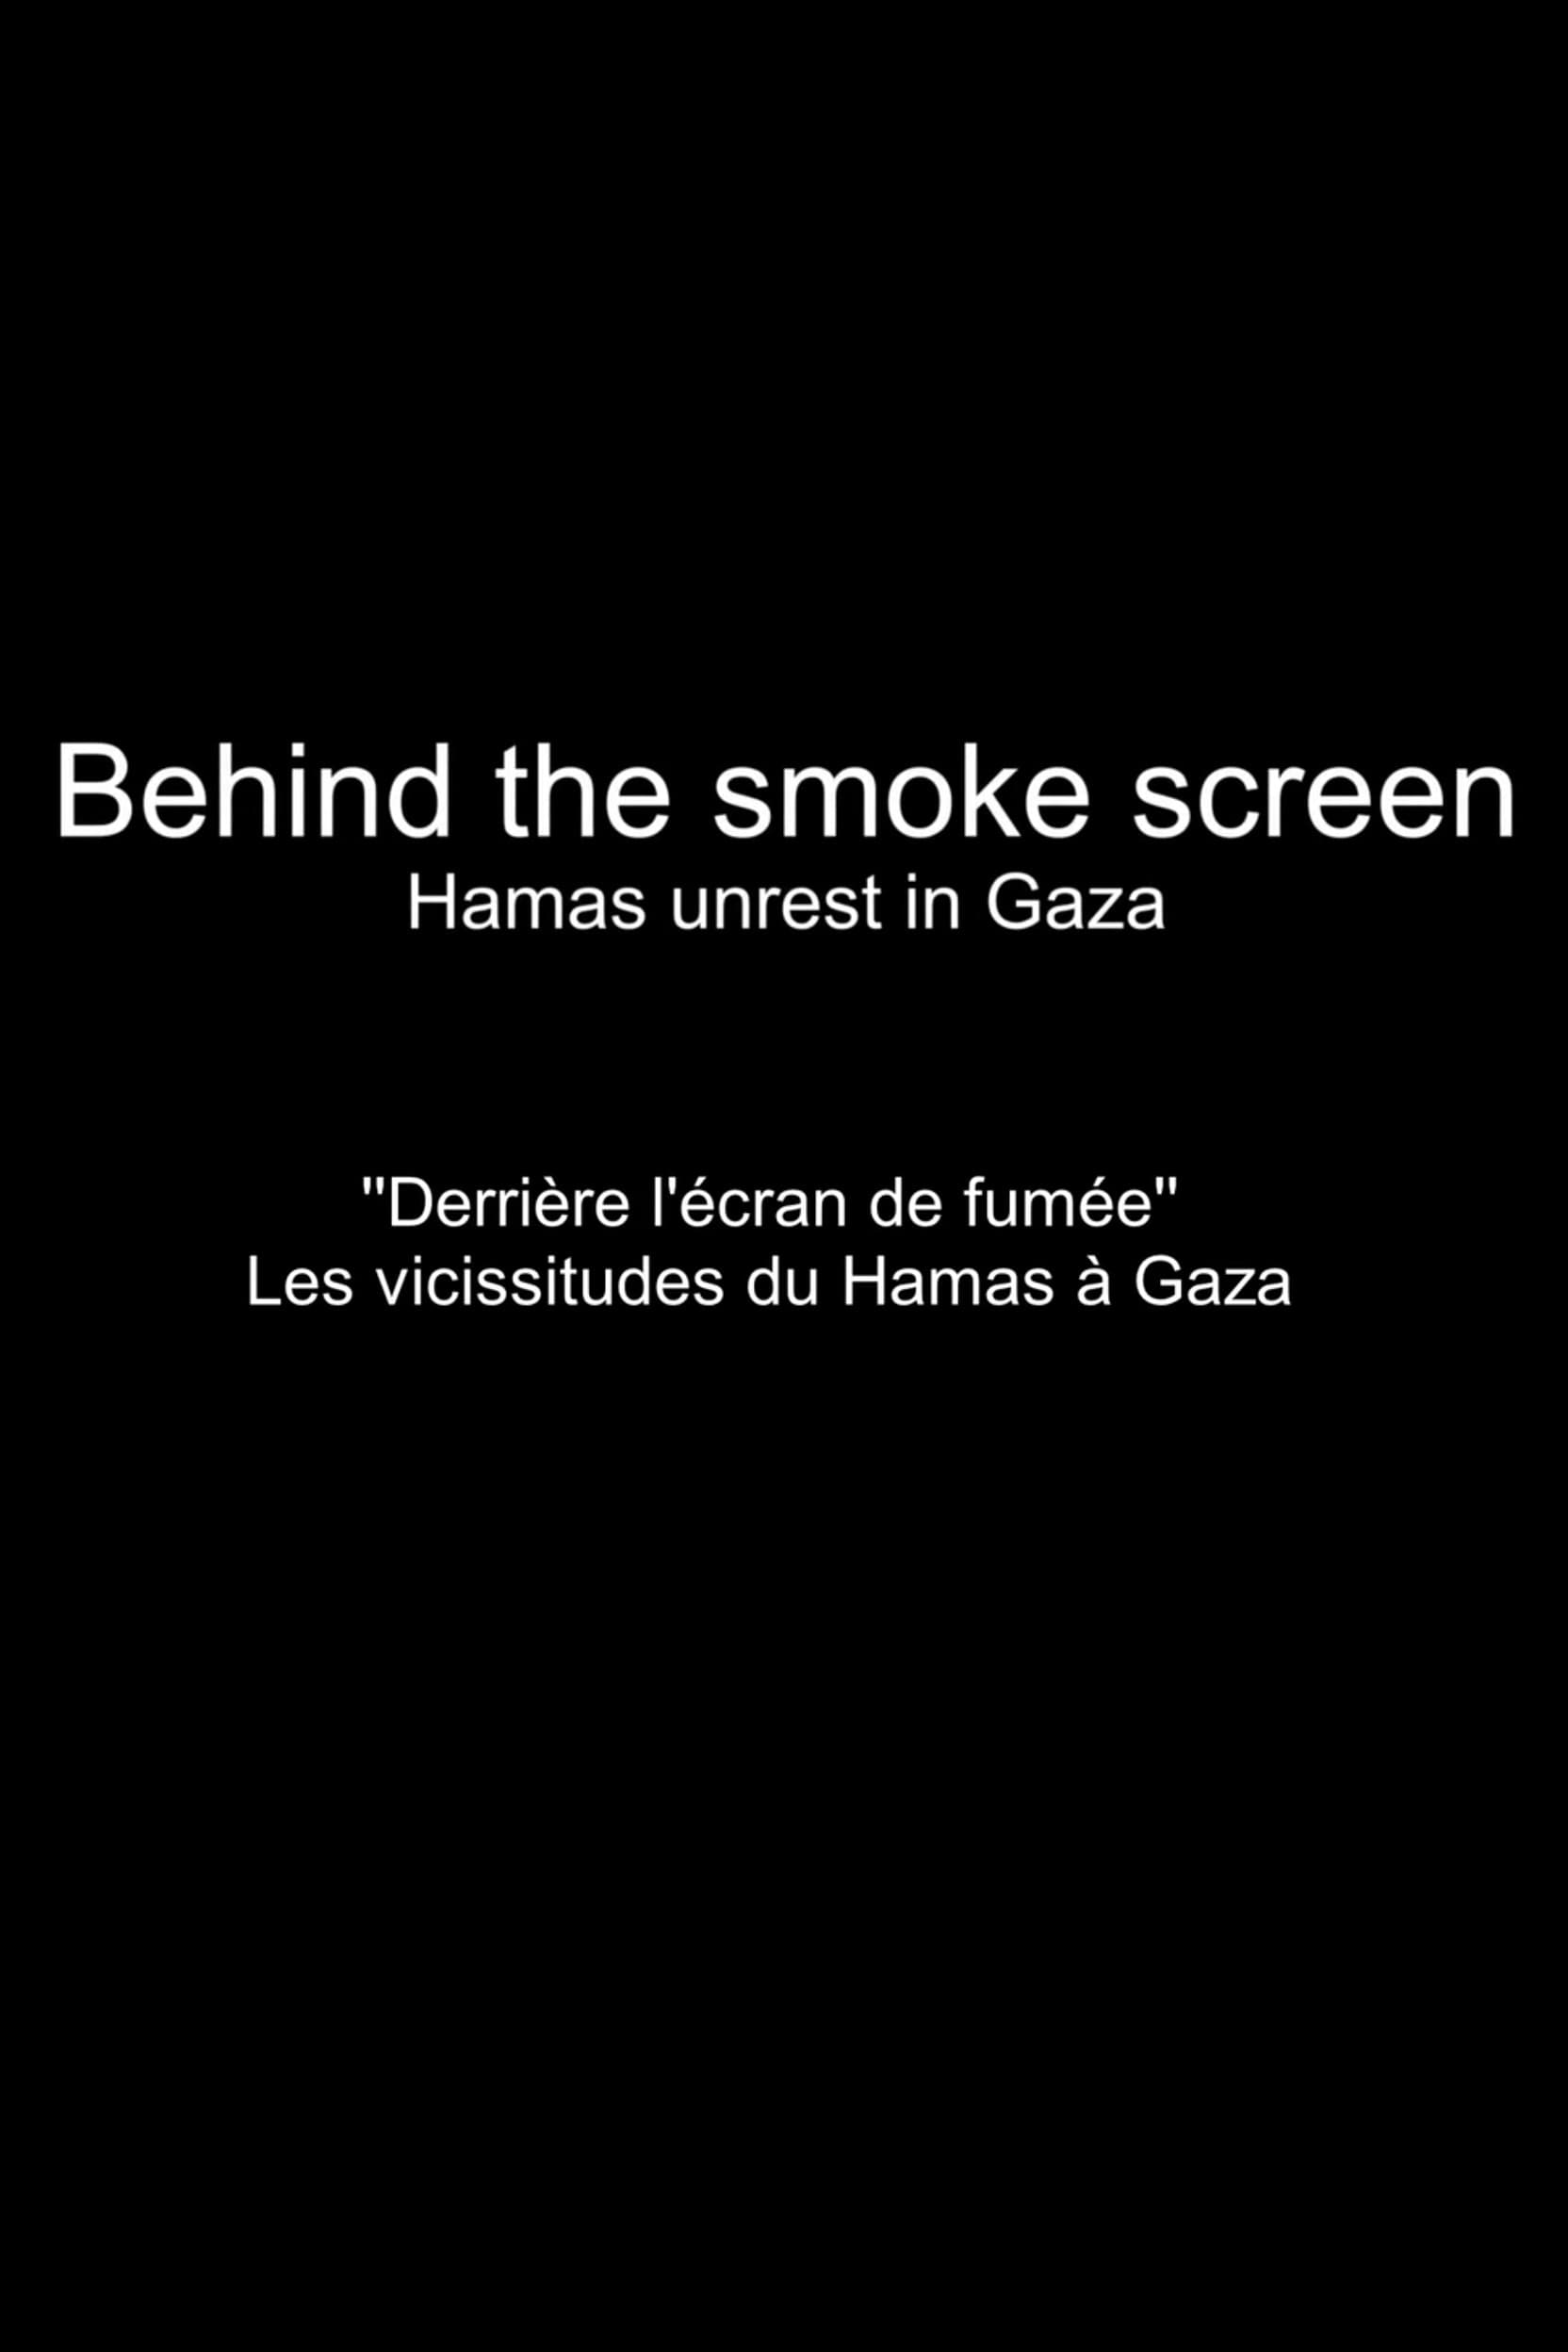 Behind the Smokescreen: Hamas Unrest in Gaza